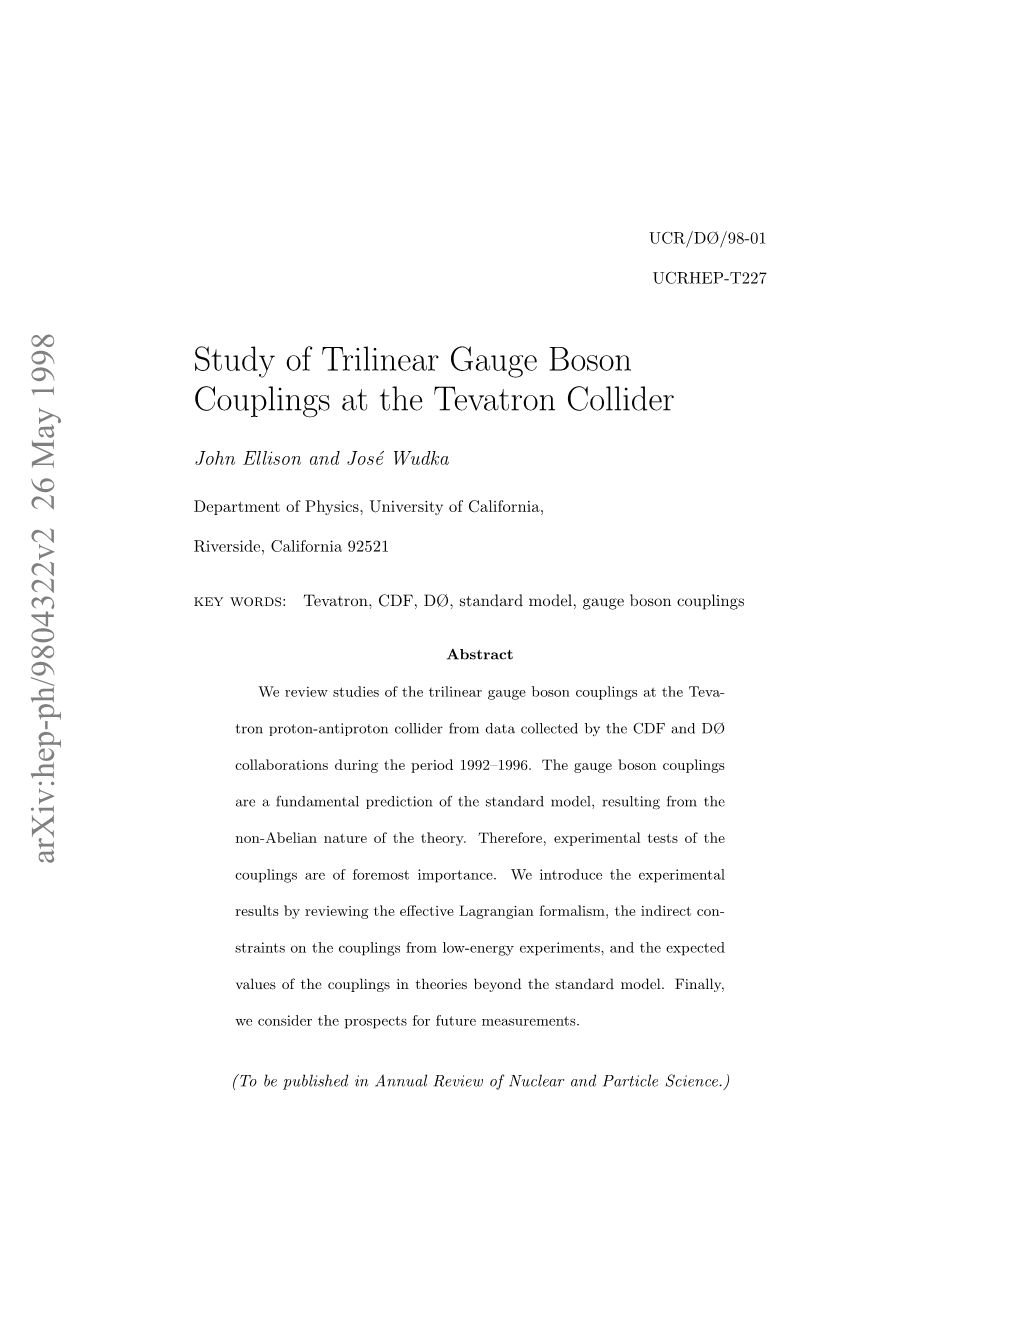 Study of Trilinear Gauge Boson Couplings at the Tevatron Collider